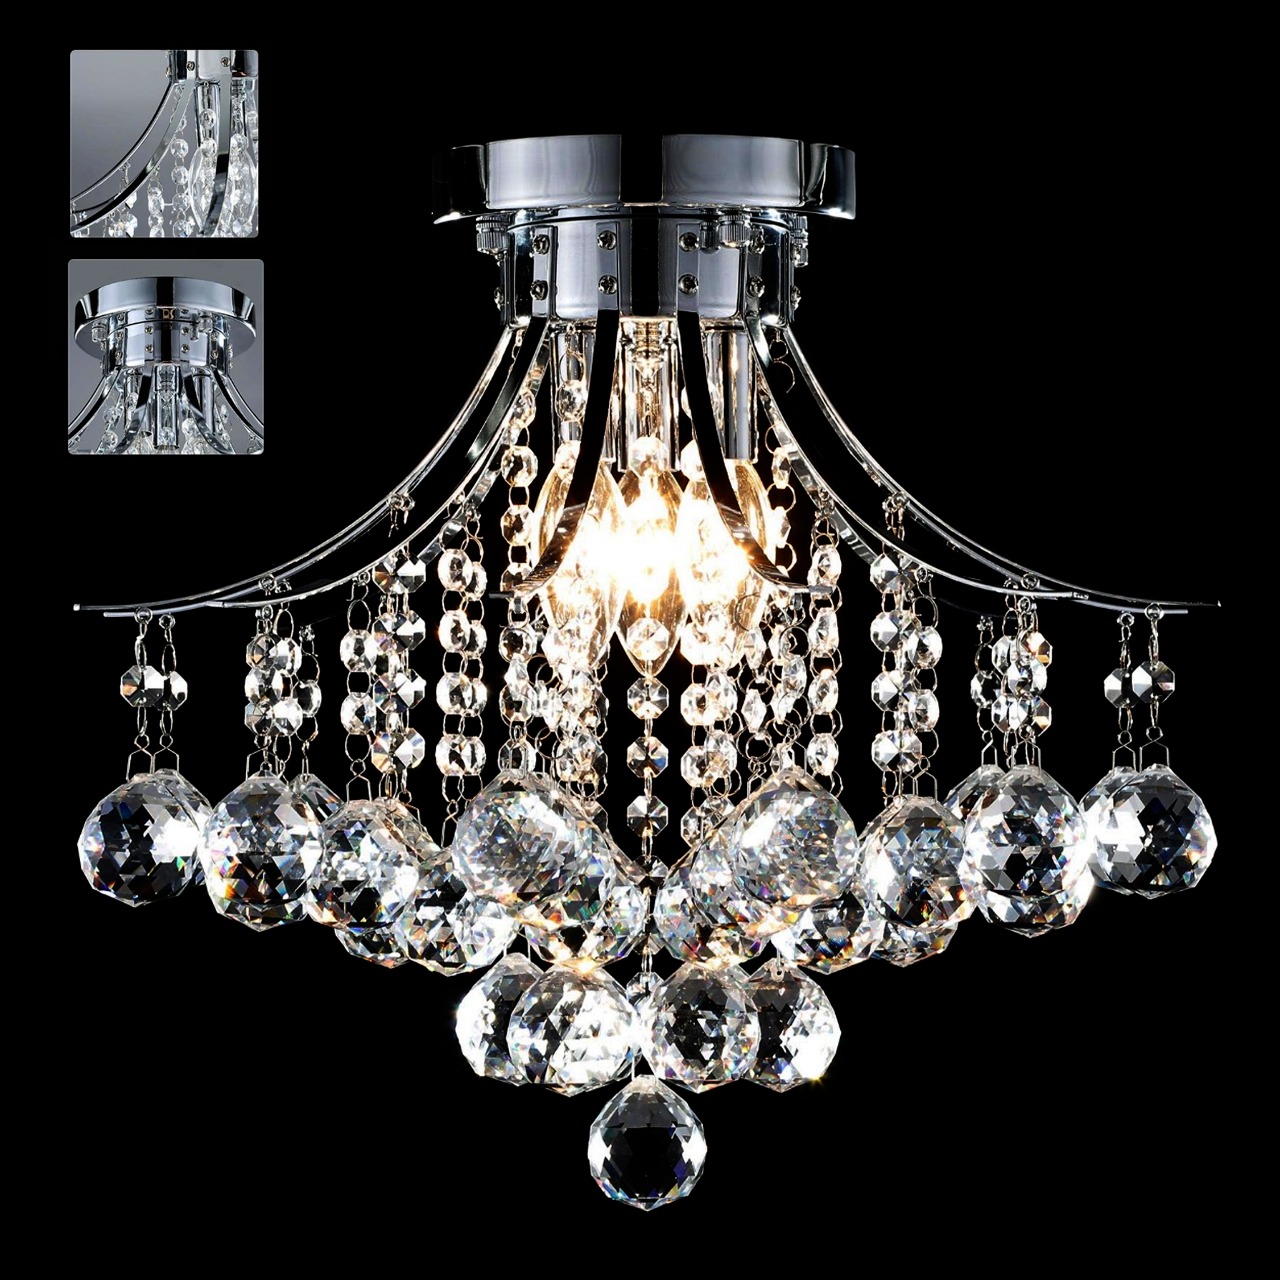 Crystal+Chandelier+with+3+lights+Mini+Style+Flush+Mount+Ceiling+Light+Fixture